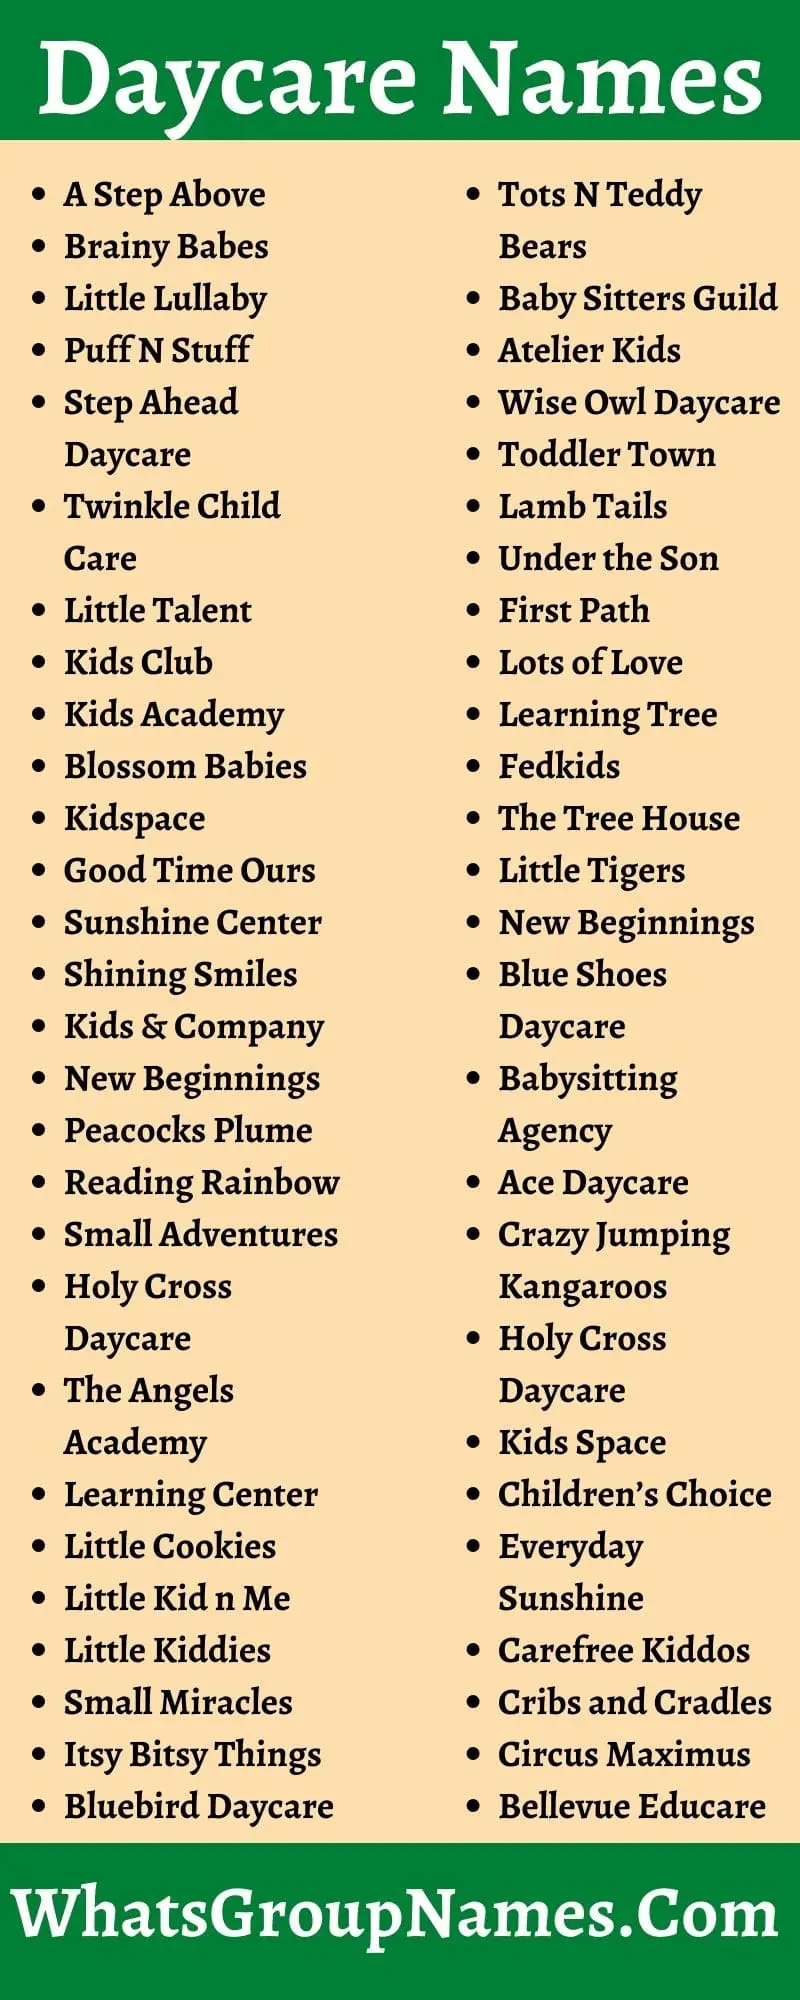 Daycare Names